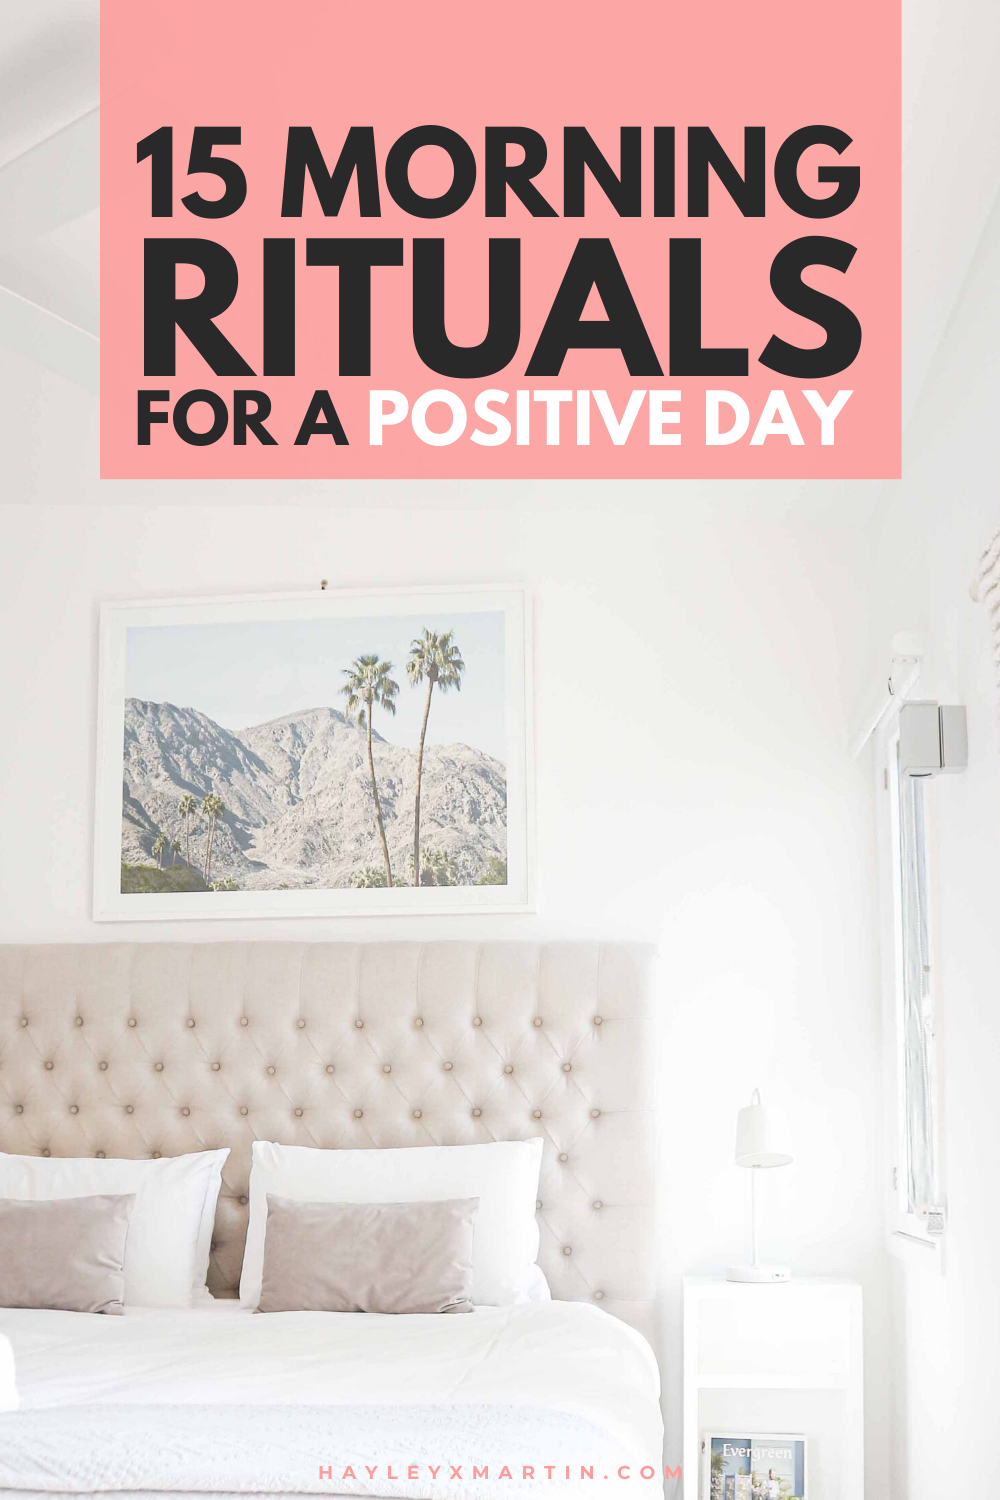 15 MORNING RITUALS FOR A POSITIVE DAY | HAYLEYXMARTIN